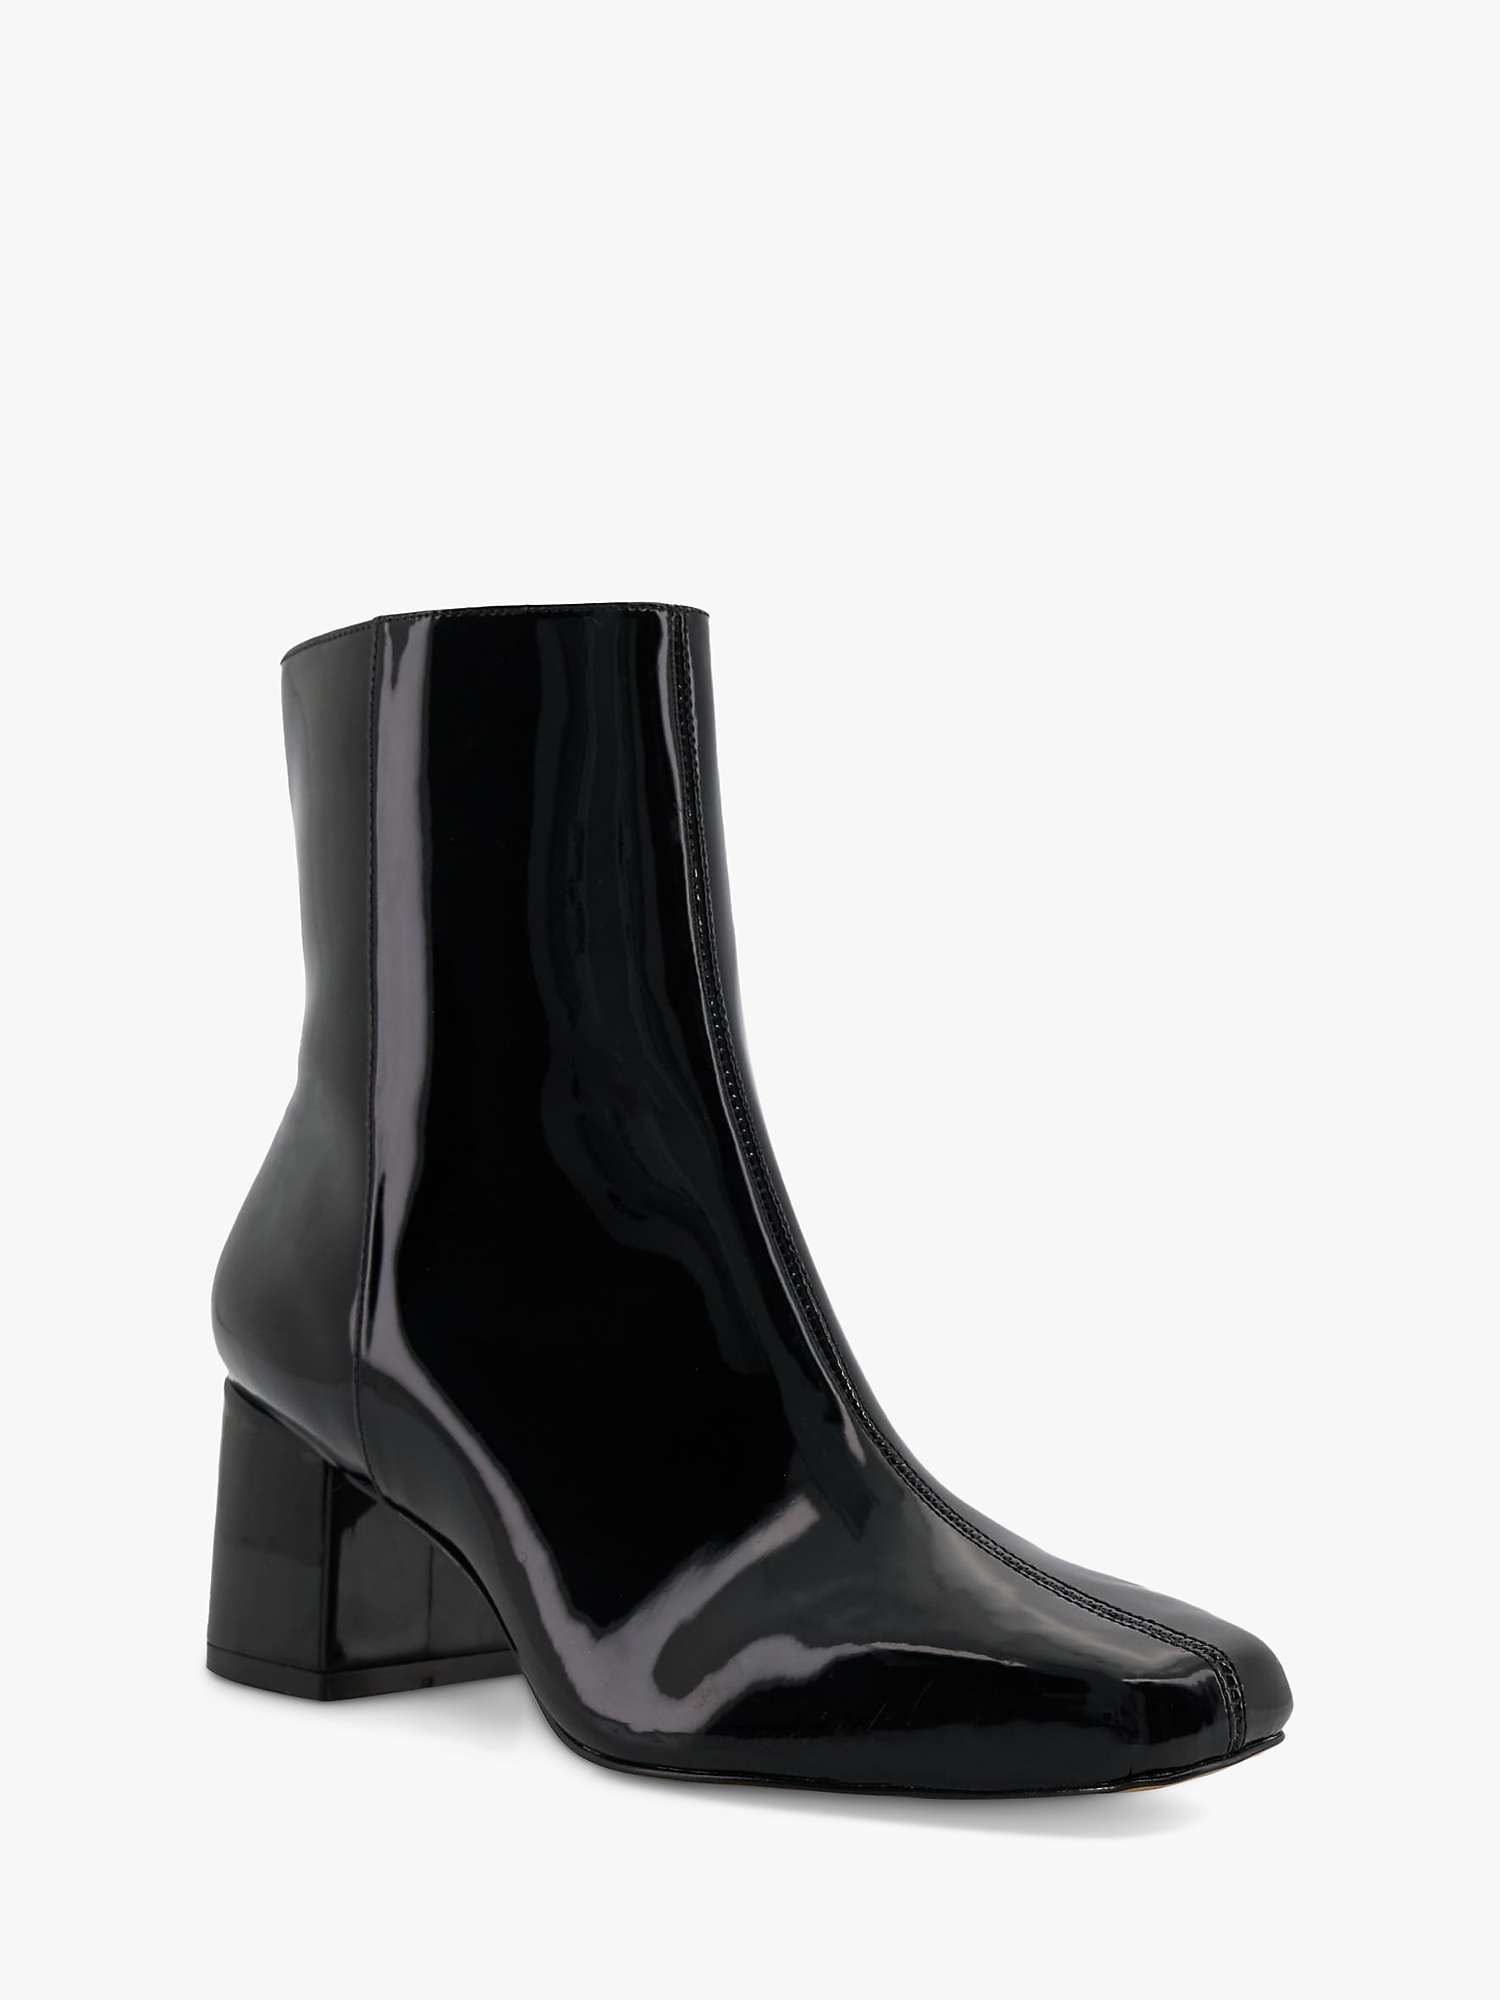 Buy Dune Onsen Patent Square Toe Ankle Boots, Black Online at johnlewis.com